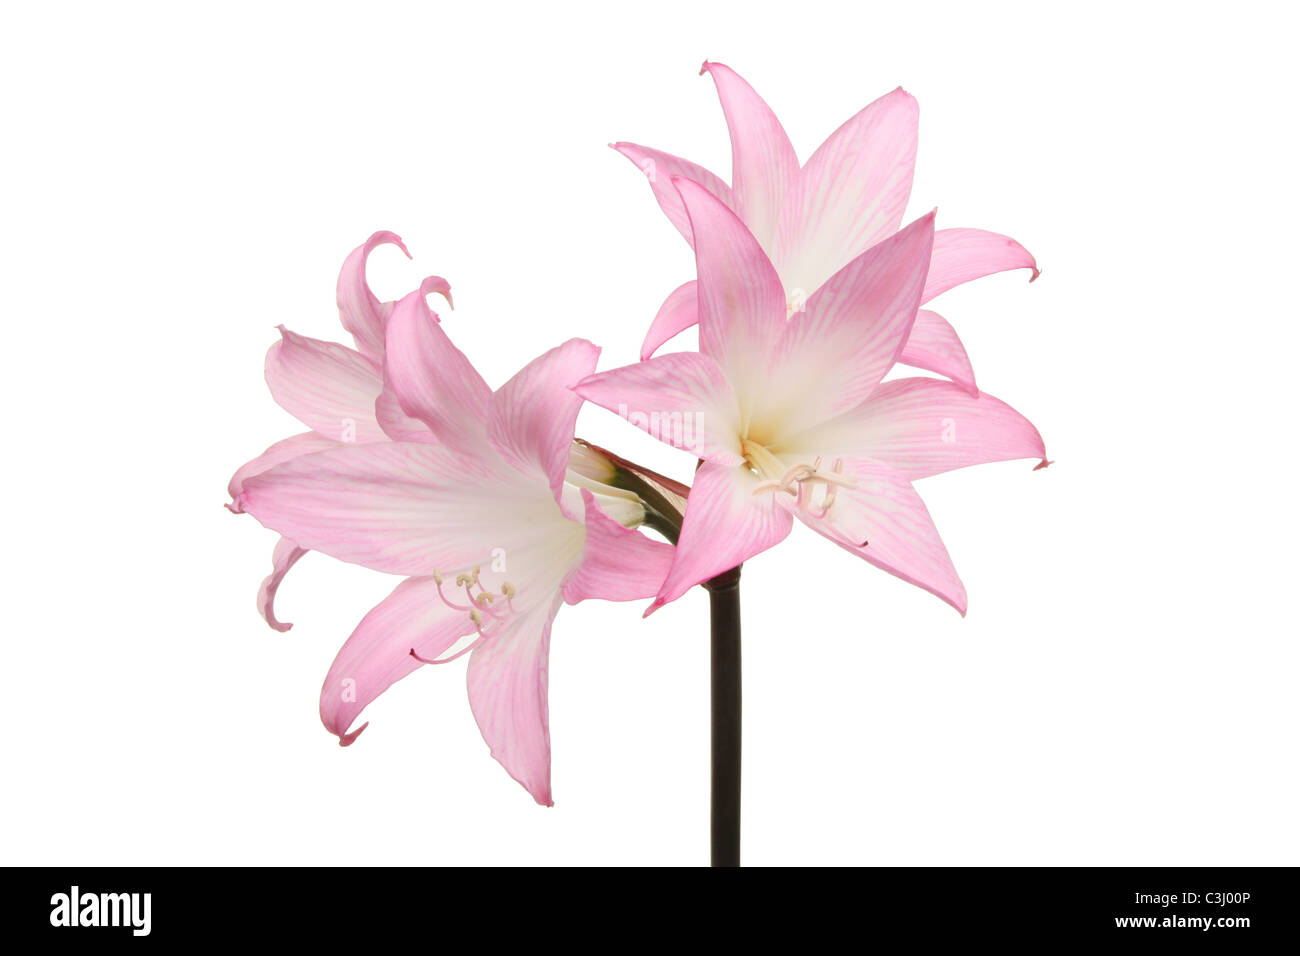 Purple lilly flowers isolated against white Stock Photo